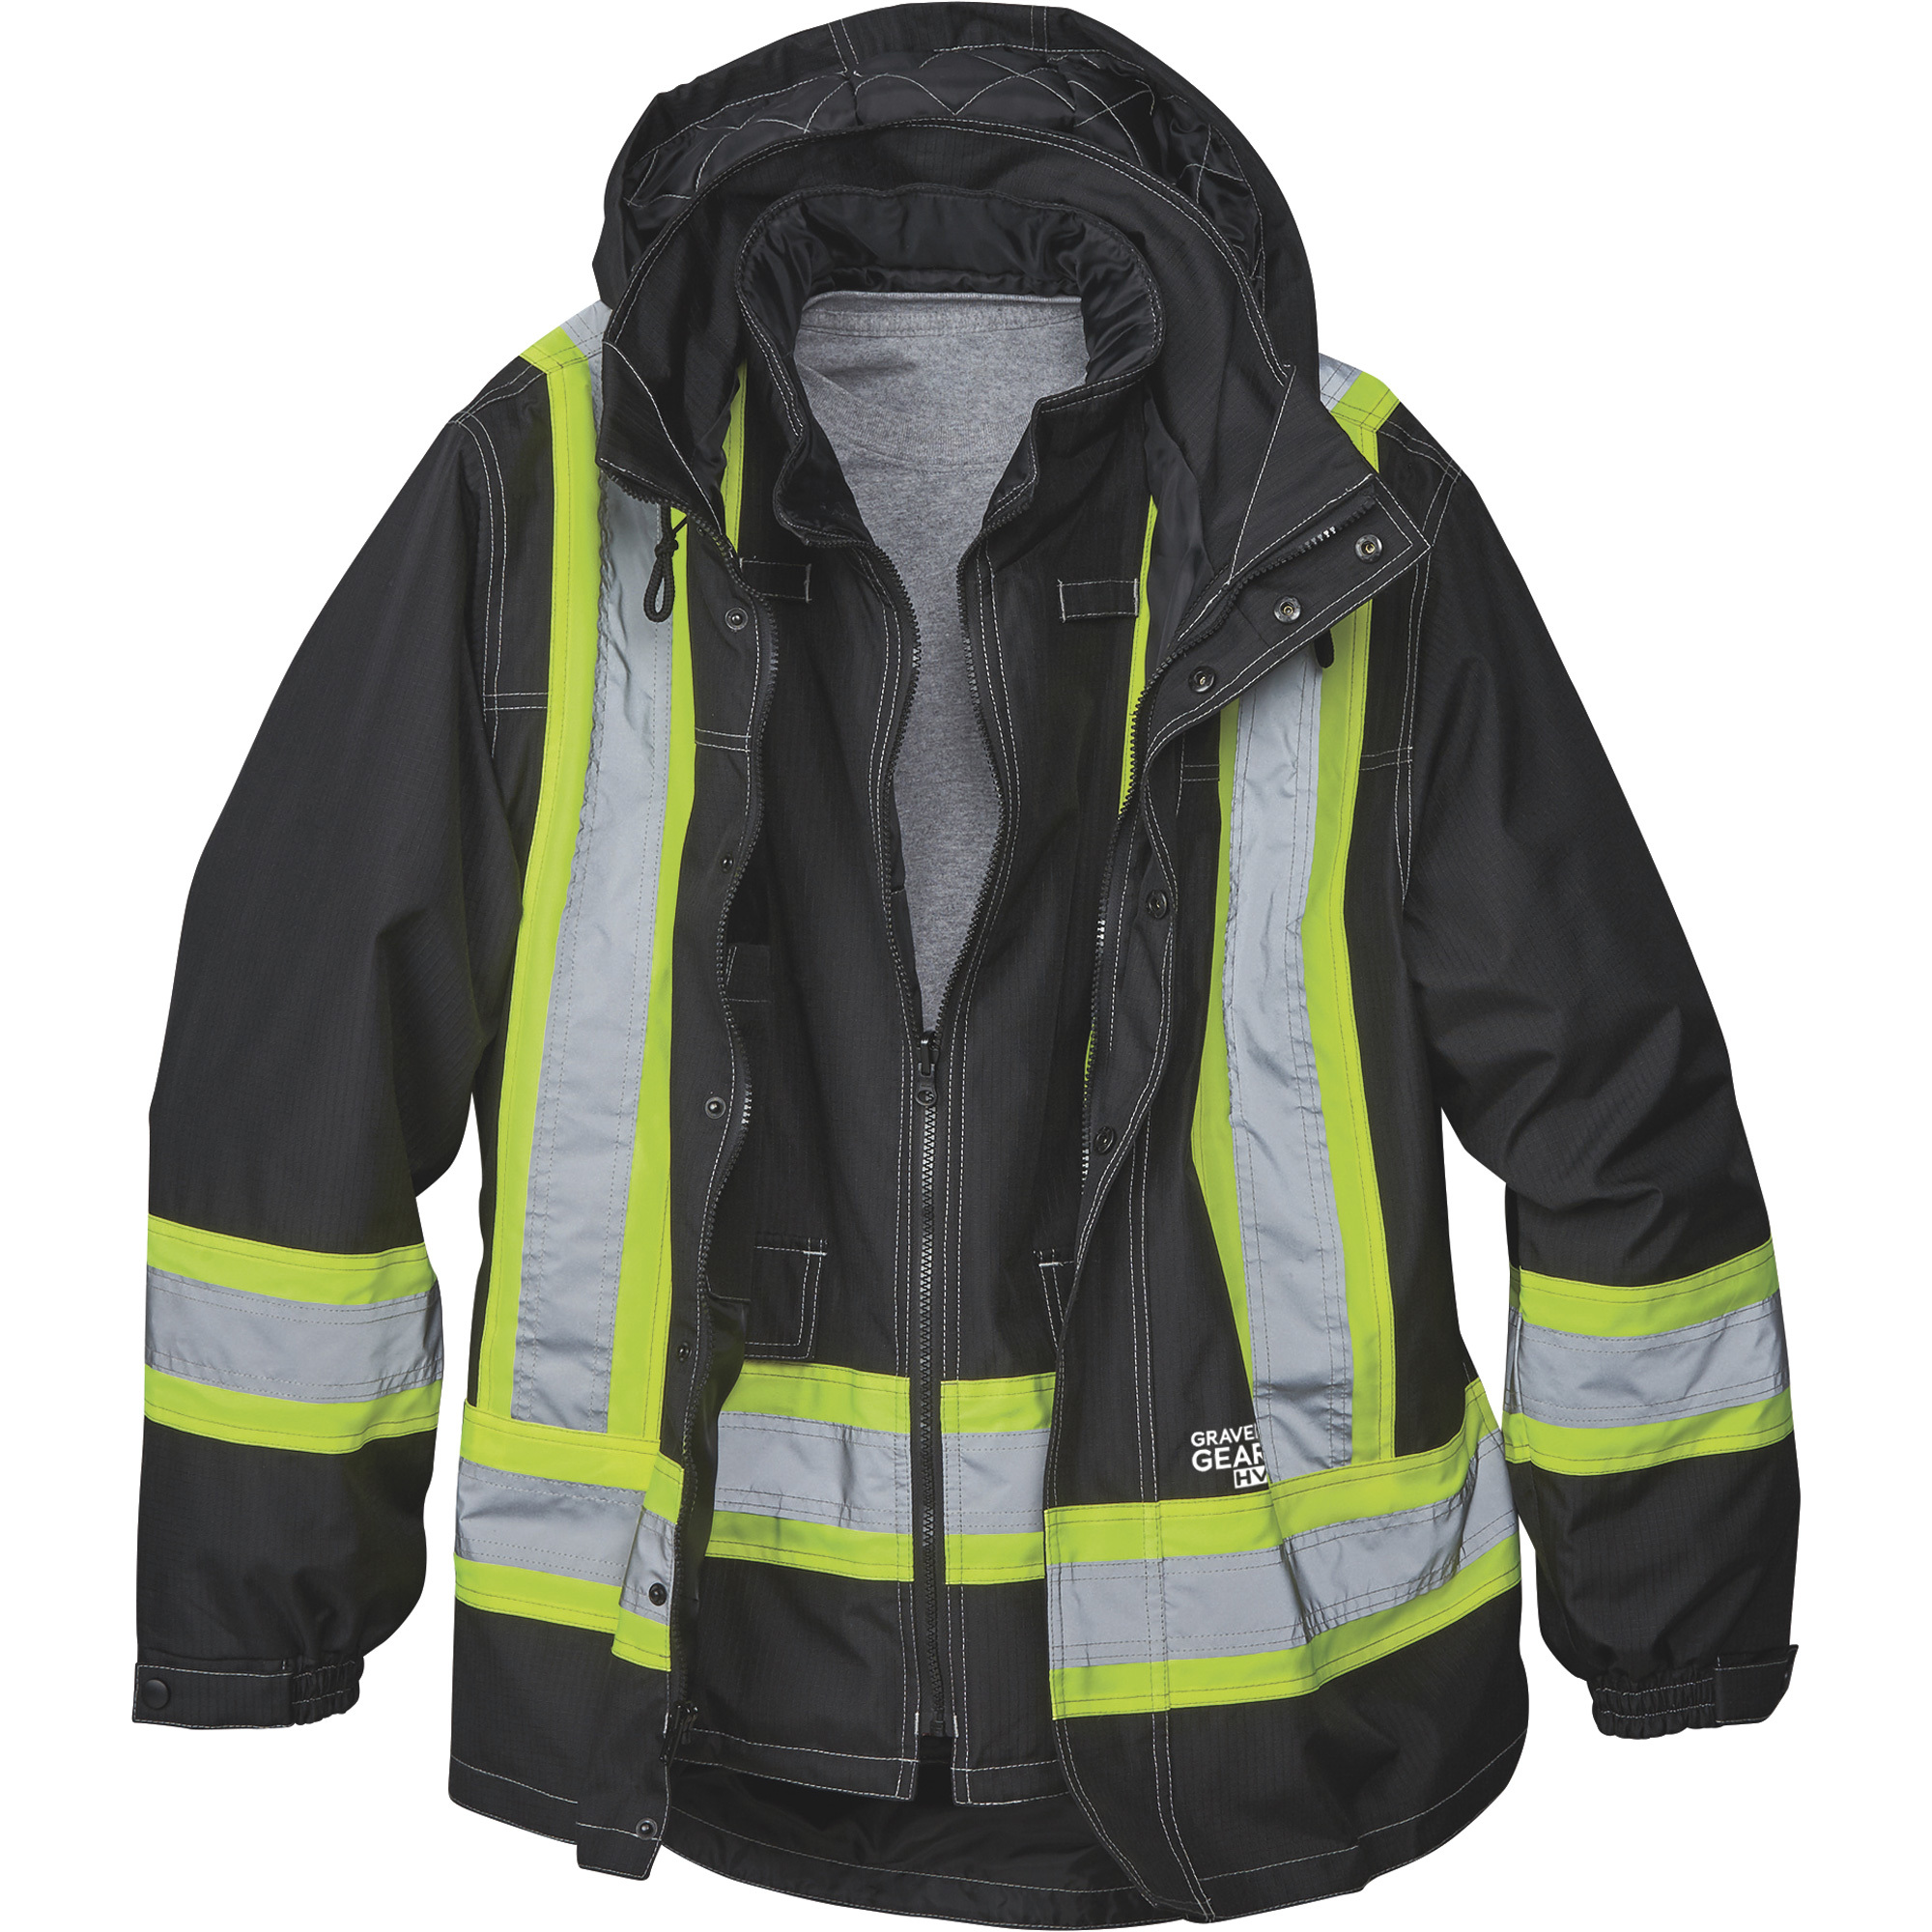 Gravel Gear Men's High Visibility 4-in-1 Safety Parka â Lime, Medium, Class 3 Shell/Class 1 Liner